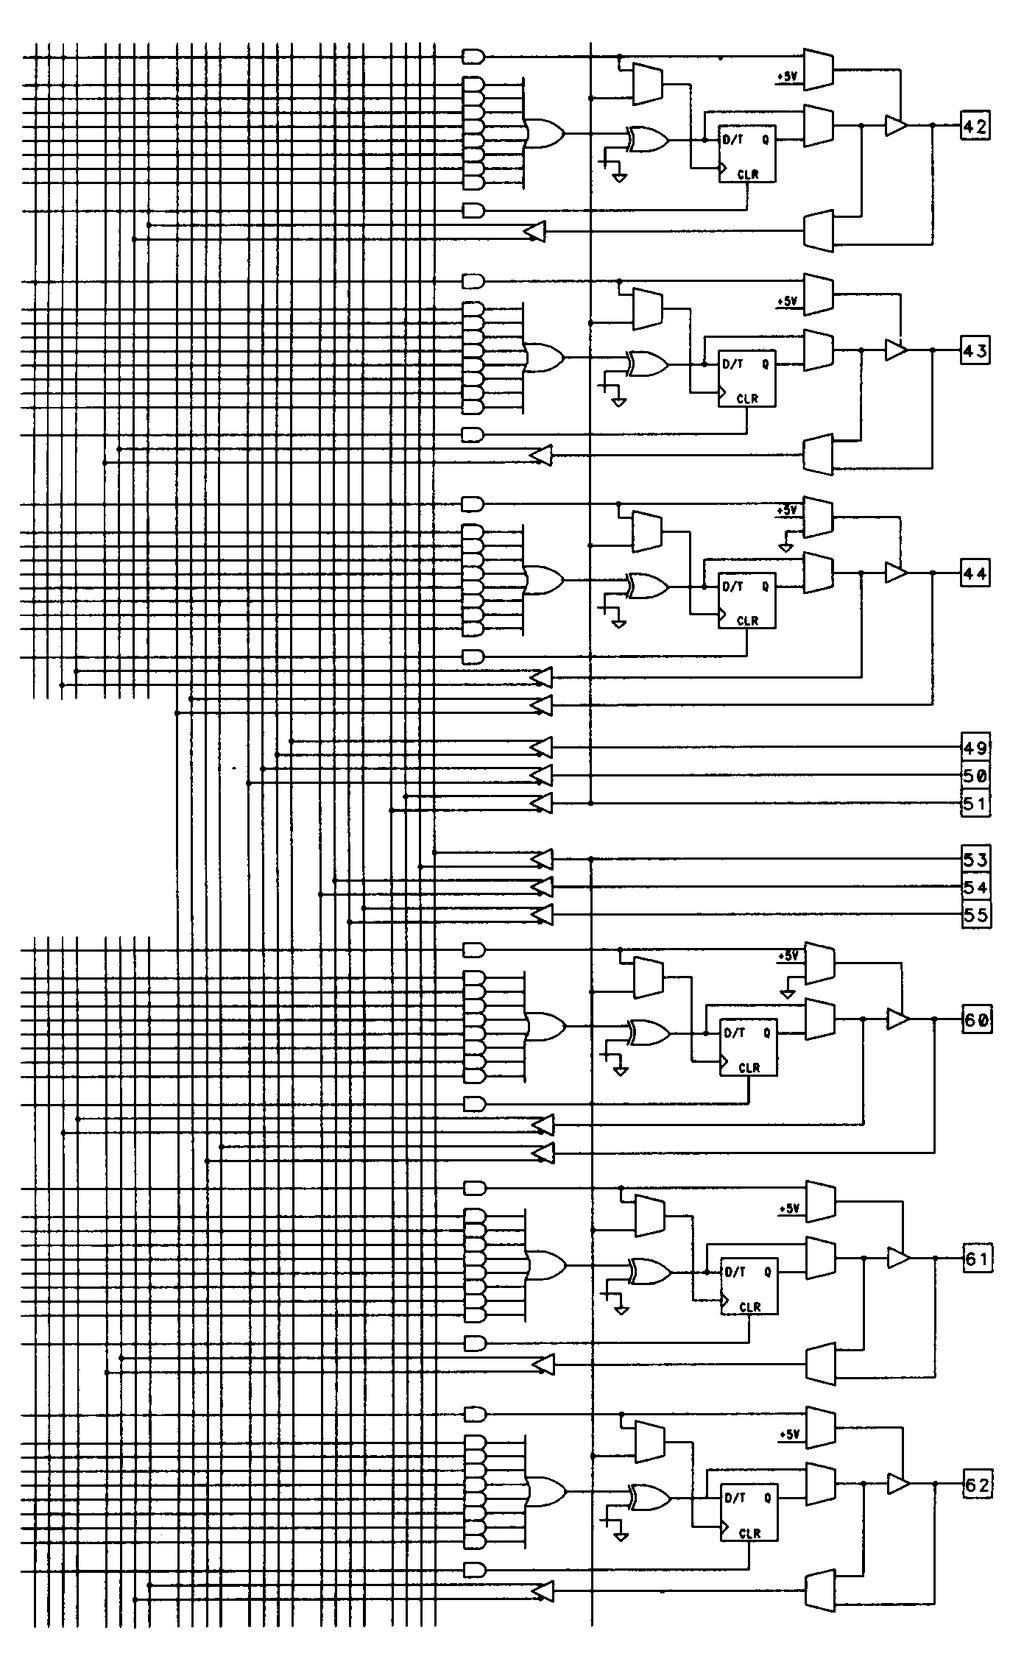 The EP1800's programmable array is split into four identical quadrants that have limited interconnects. Portions of two quadrants are shown in the figure.